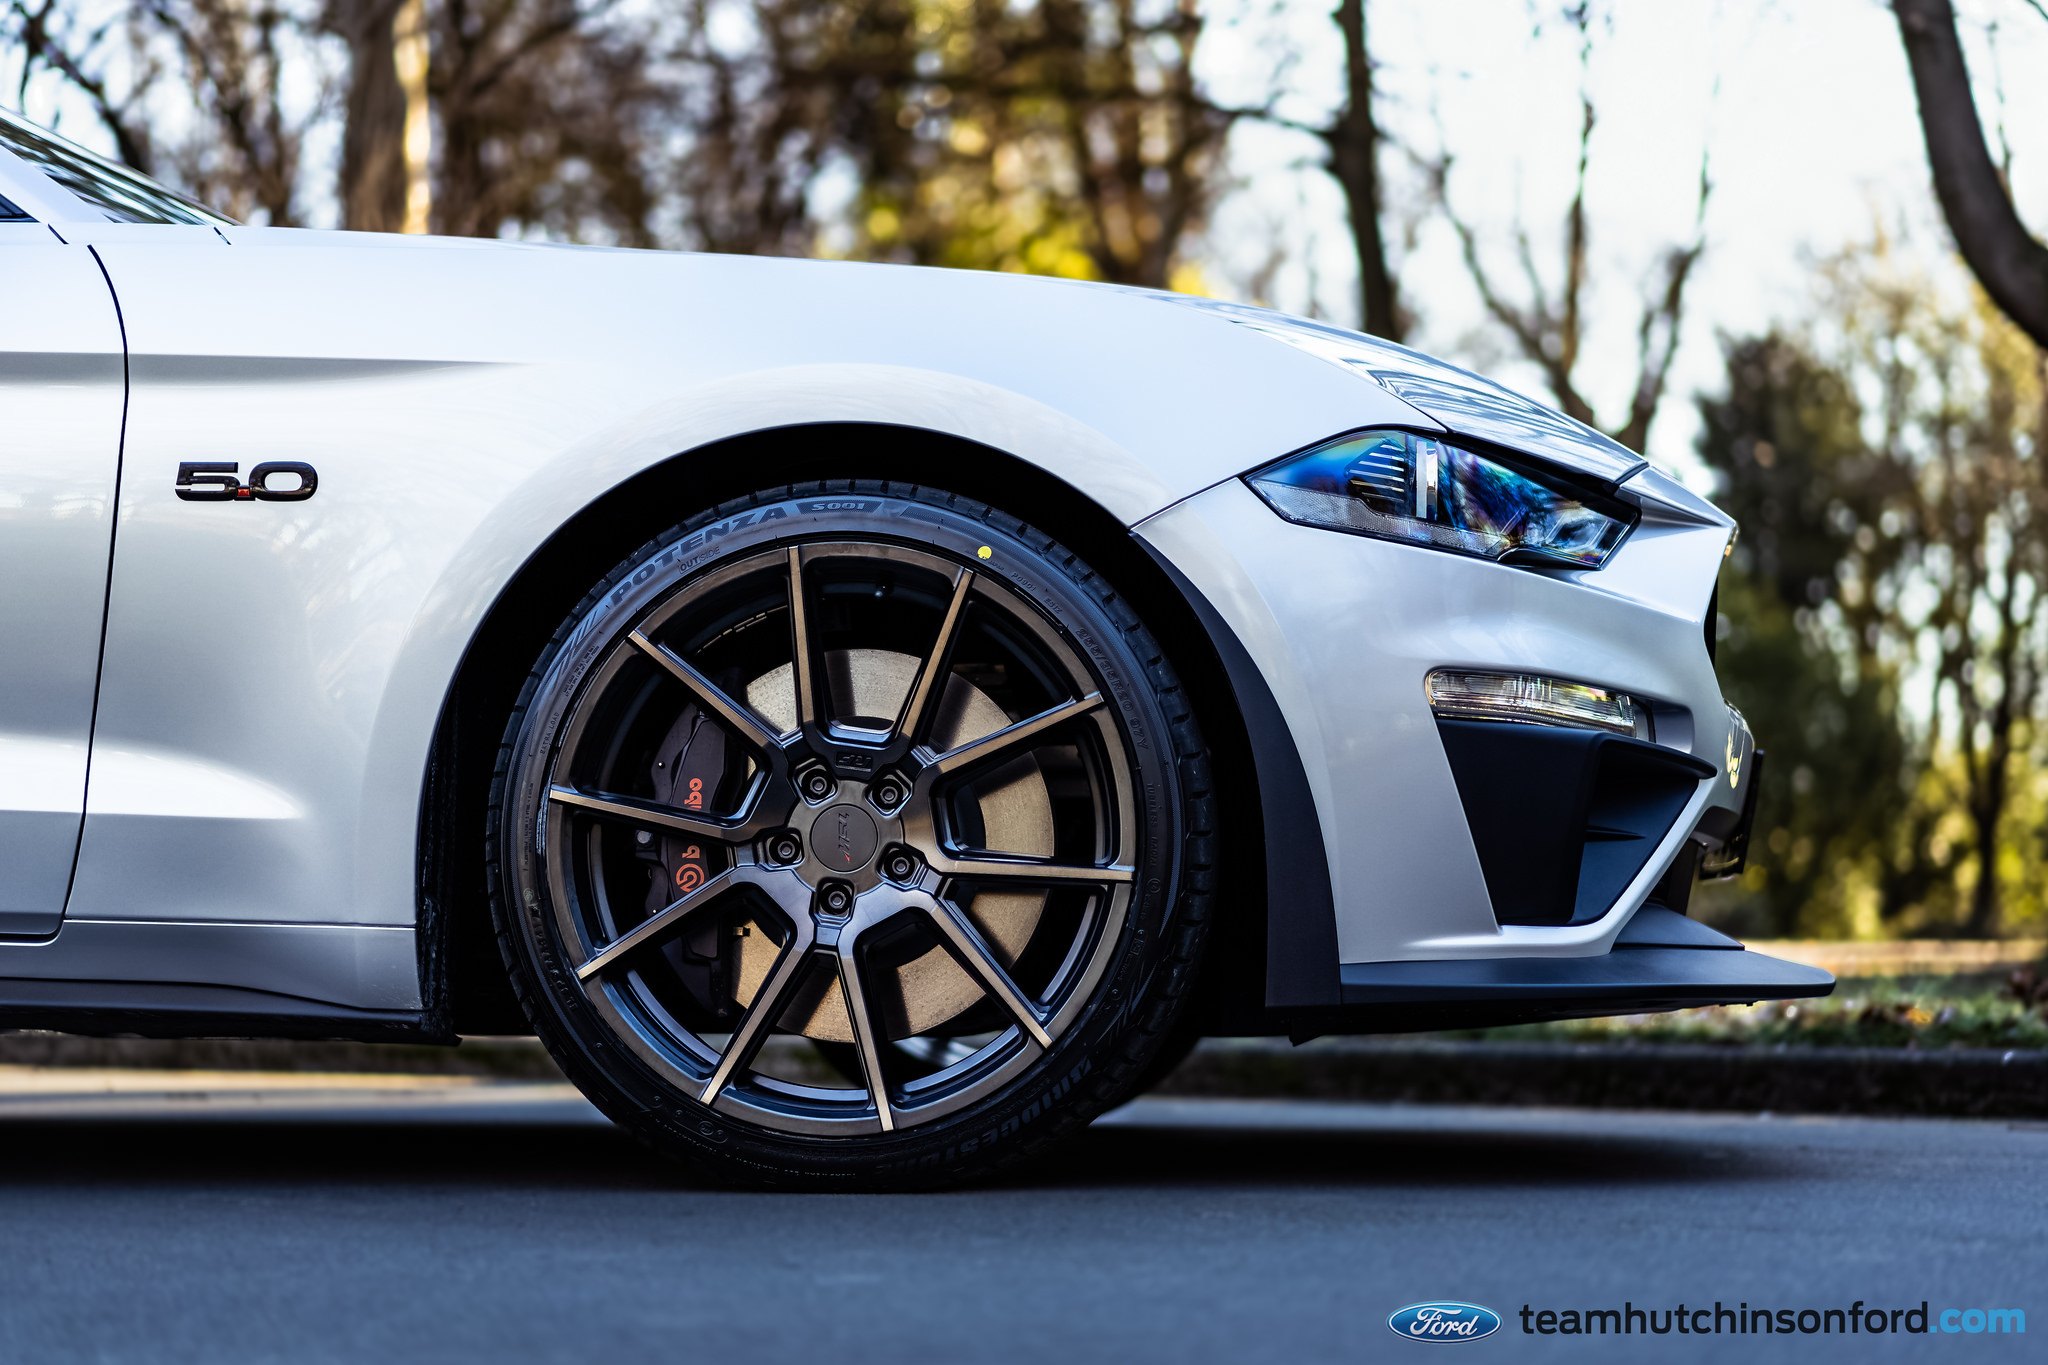 TSW Wheels with Brembo Brakes on White Ford Mustang - Photo by TSW Wheels